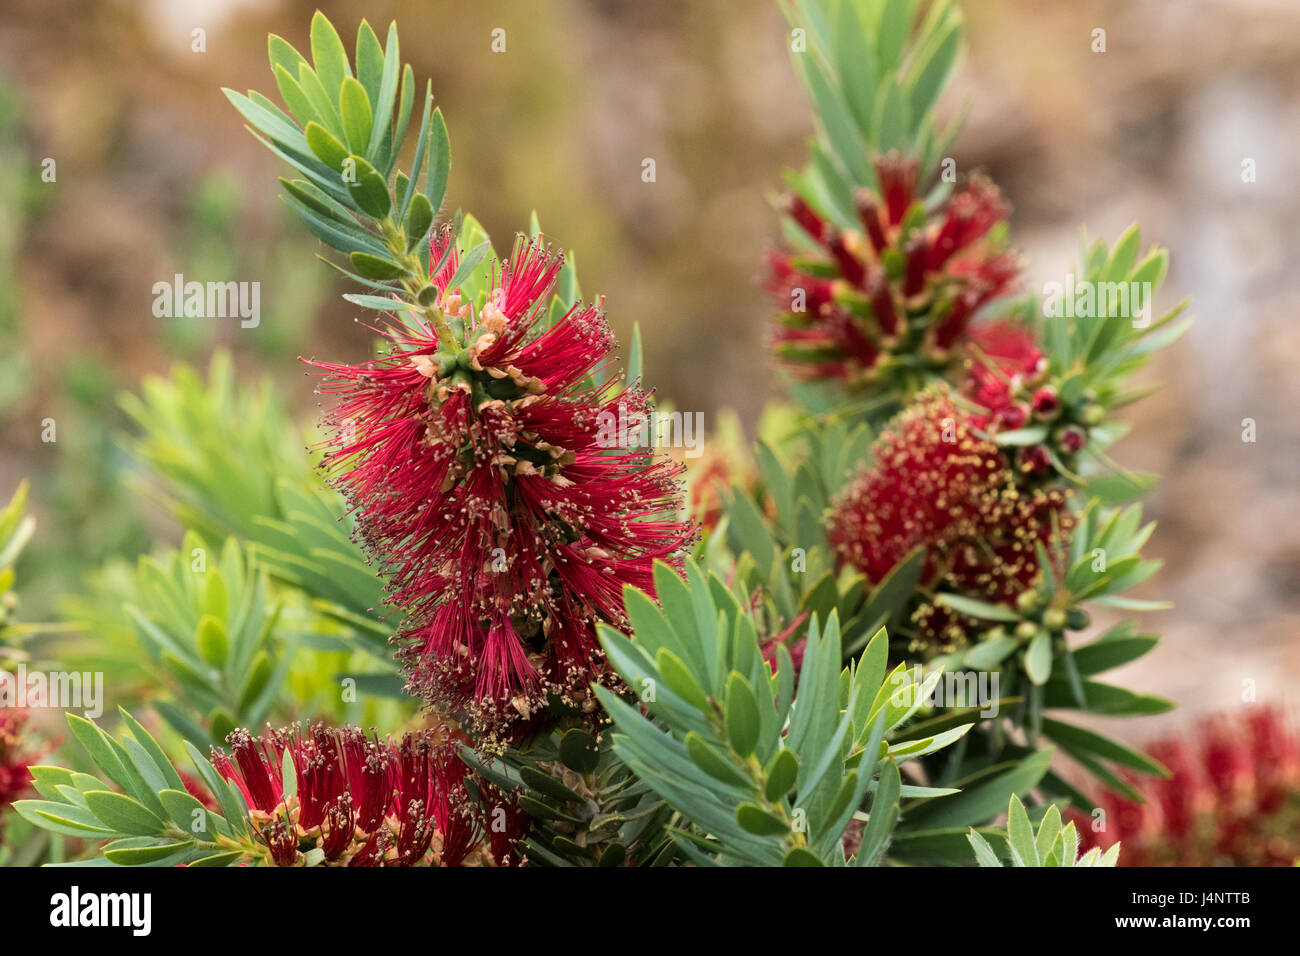 A close-up photograph of a Bottlebrush plant showing the unique cylindrical shaped nature of the flower. Stock Photo